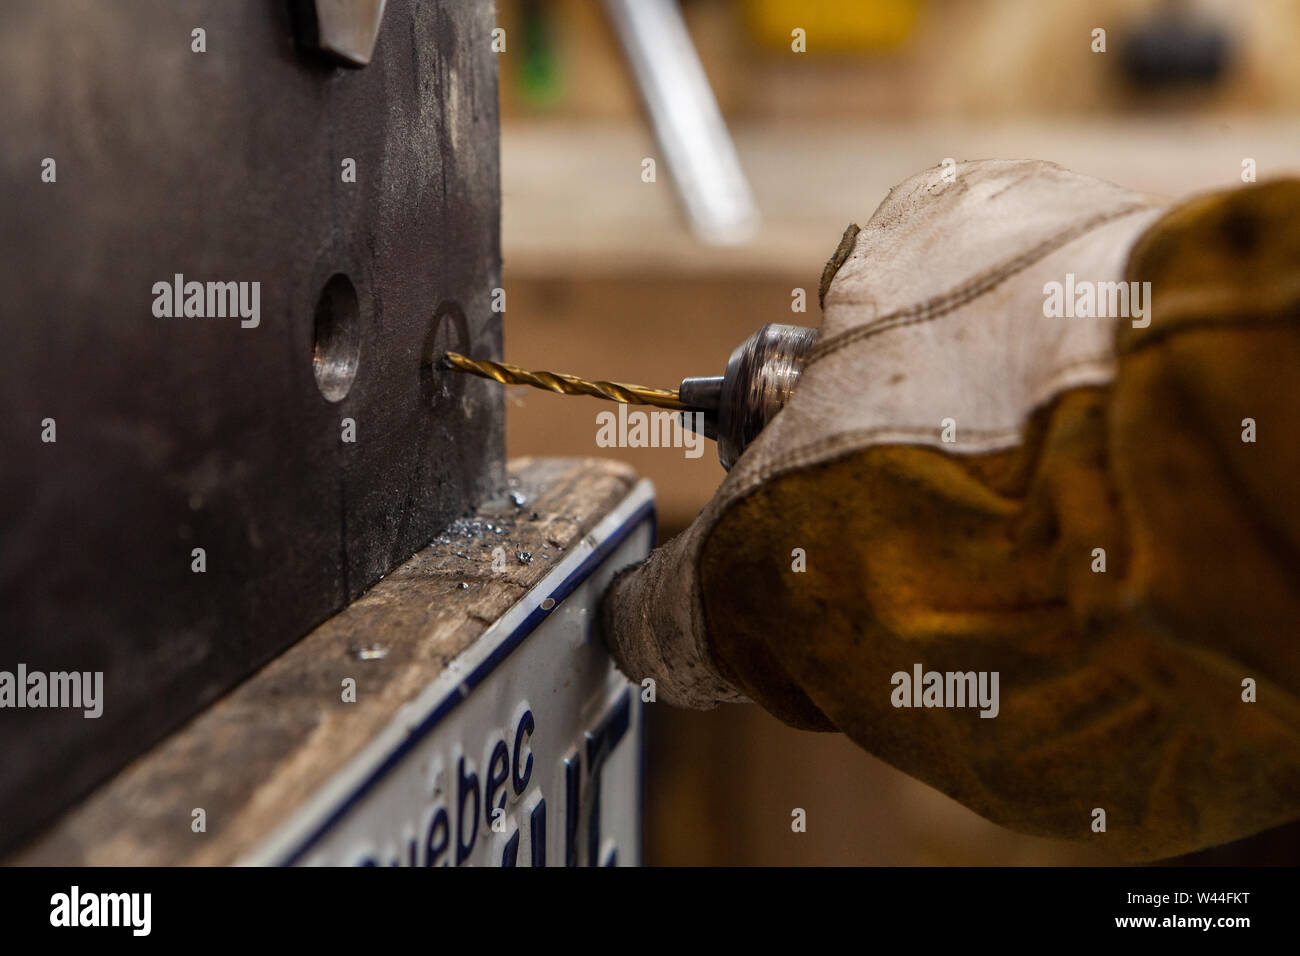 A closeup view on a metalworker using a power drill to put a pilot hole through a heavy duty steel beam. Worker wearing protective gloves drilling hole. Stock Photo